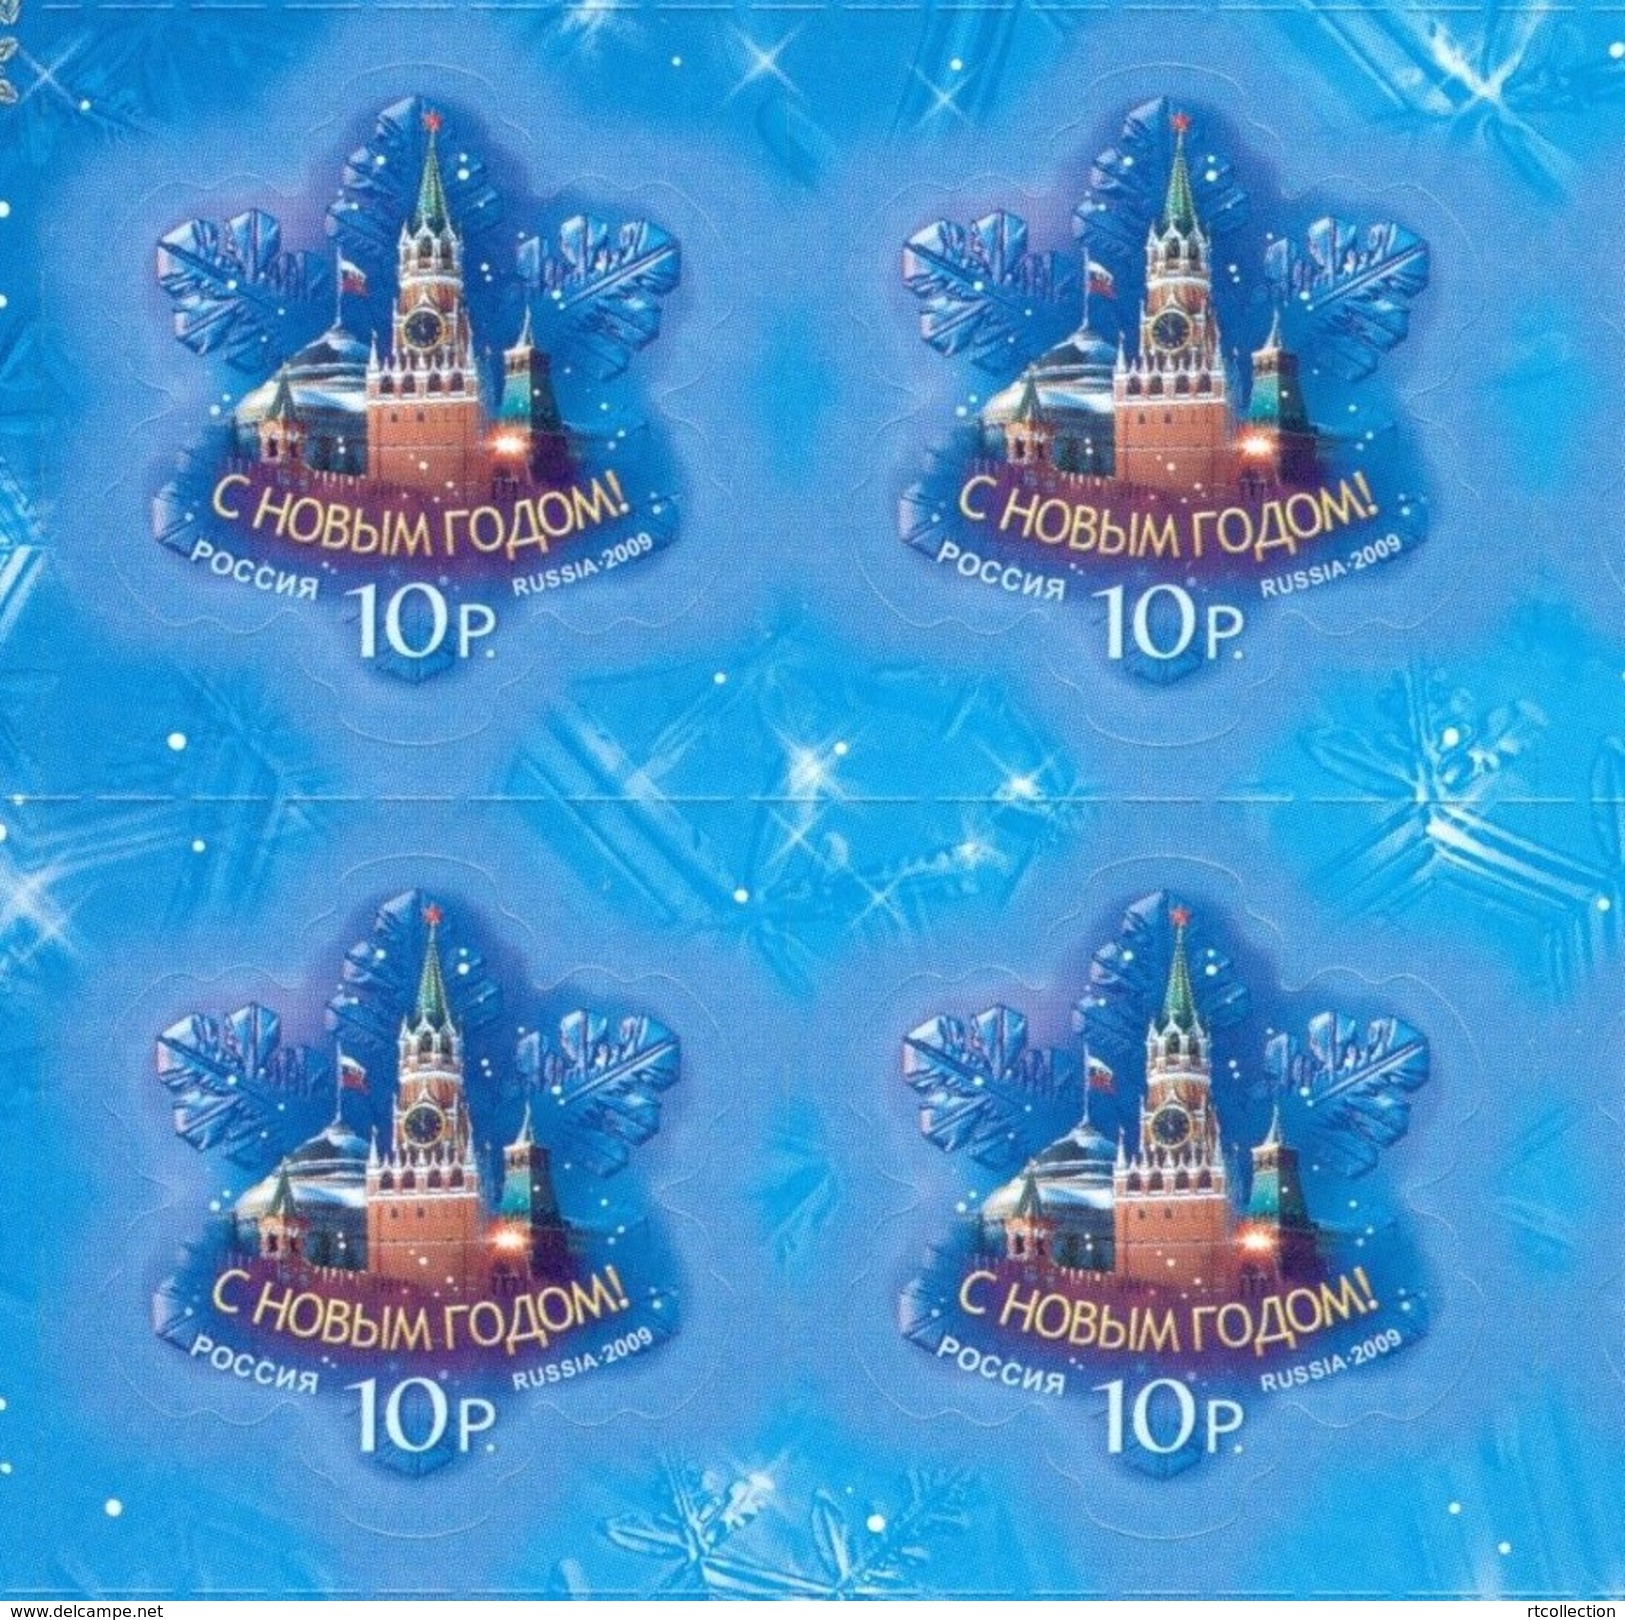 Russia 2009 Block Happy New Year Celebrations Moscow Kremlin Architecture Clocks Self-adhesive Stamps MNH SC 7190 - Clocks